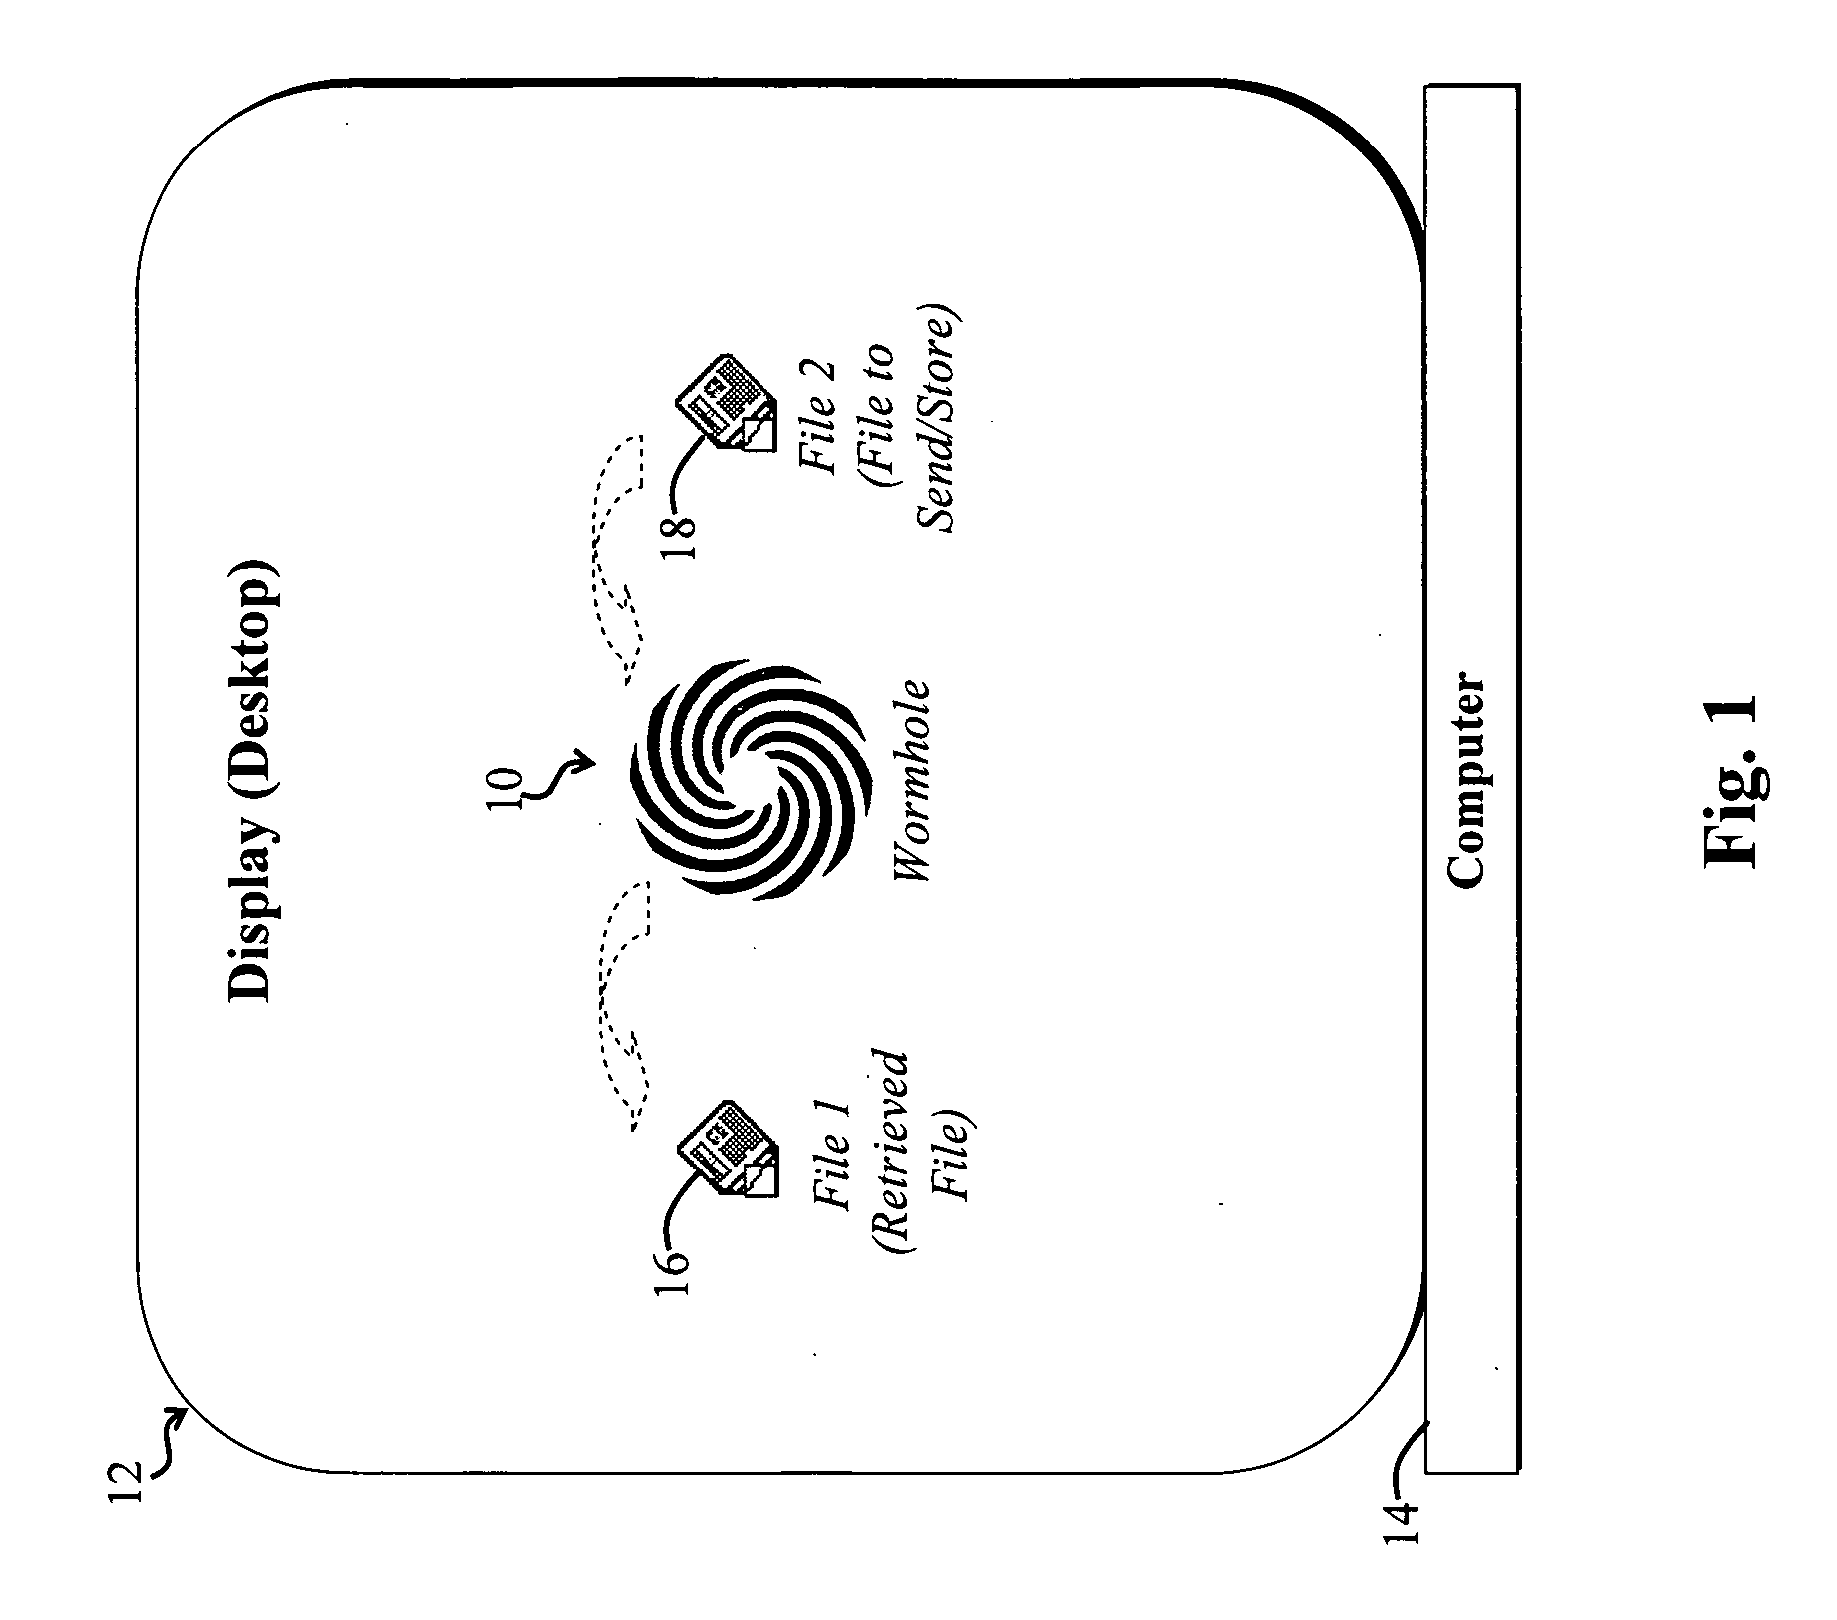 System and method for organization and retrieval of files